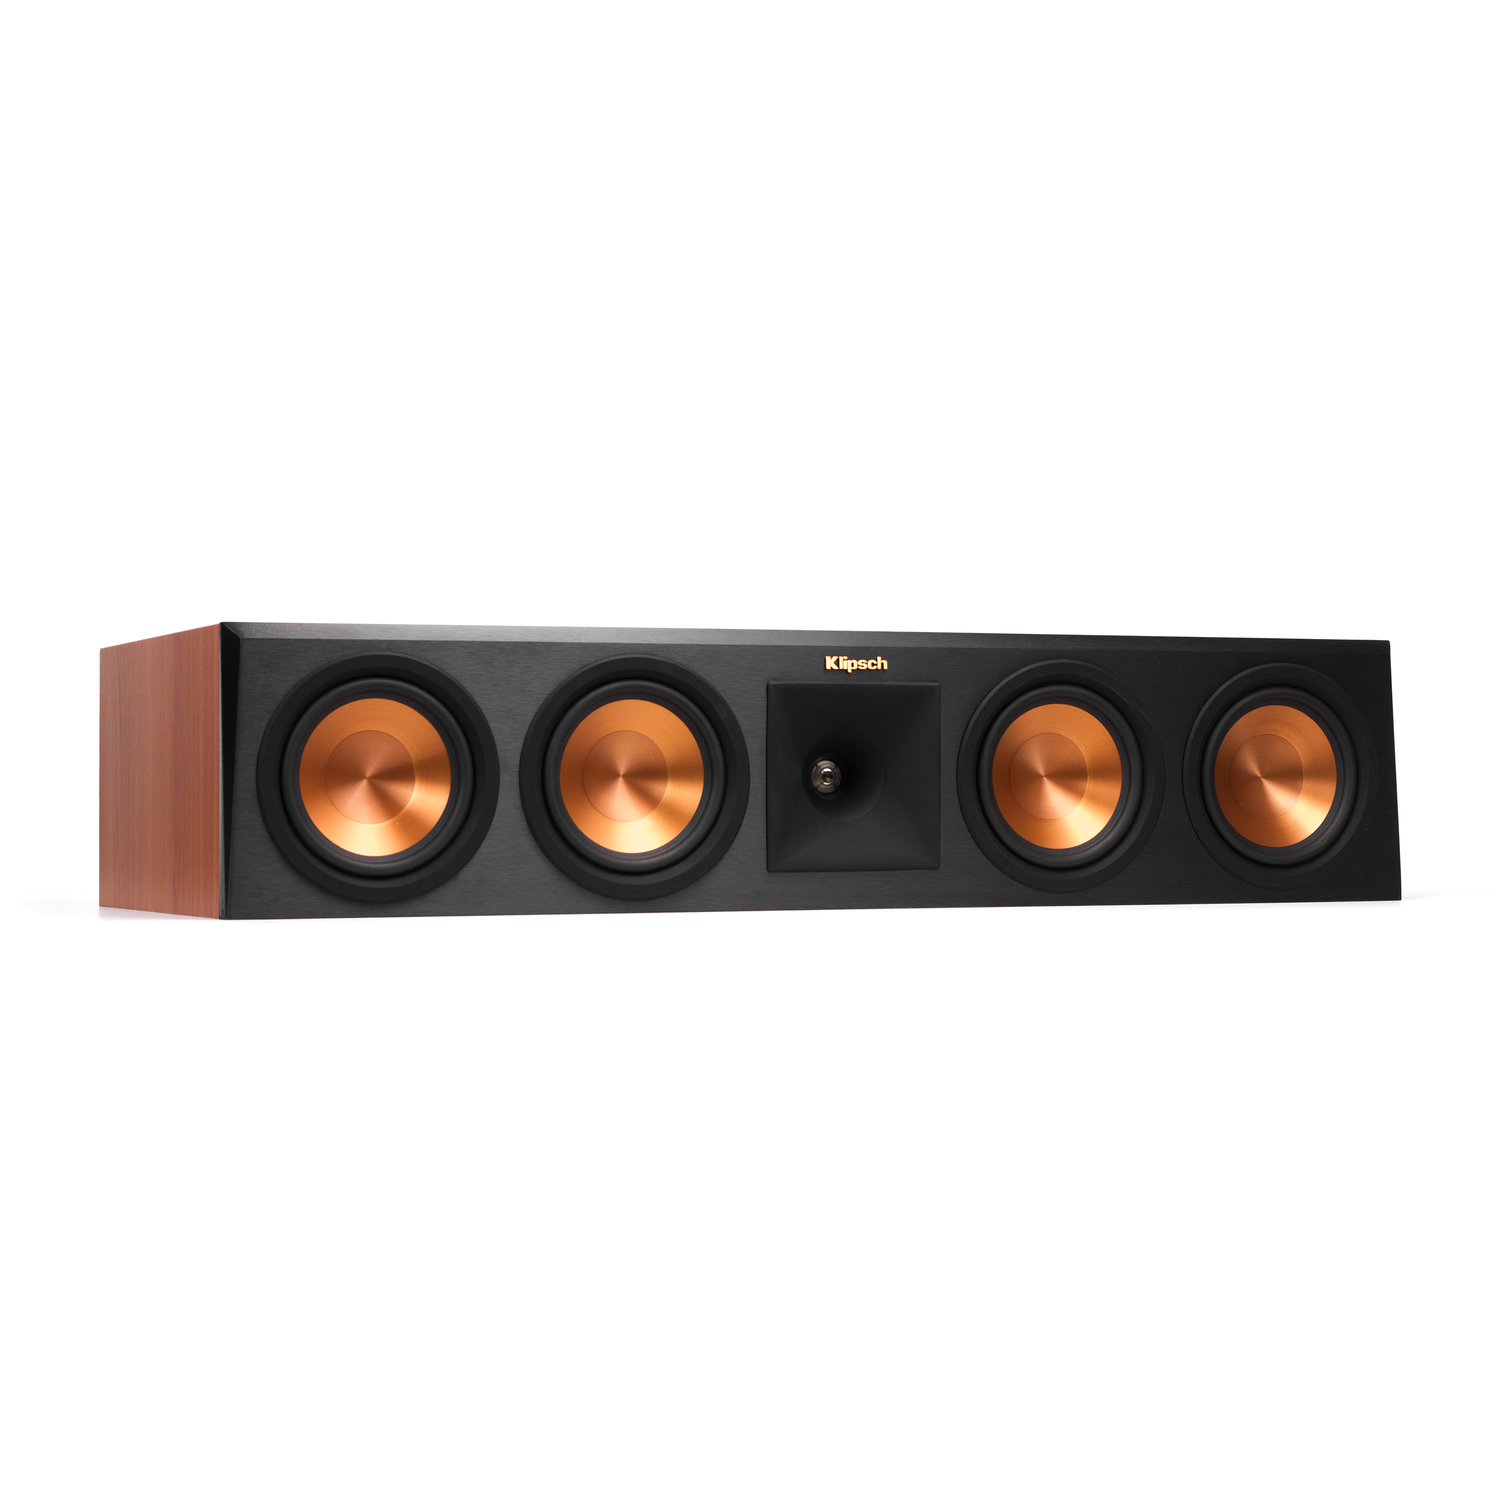 <span style="font-weight: bold;">Klipsch</span><br>